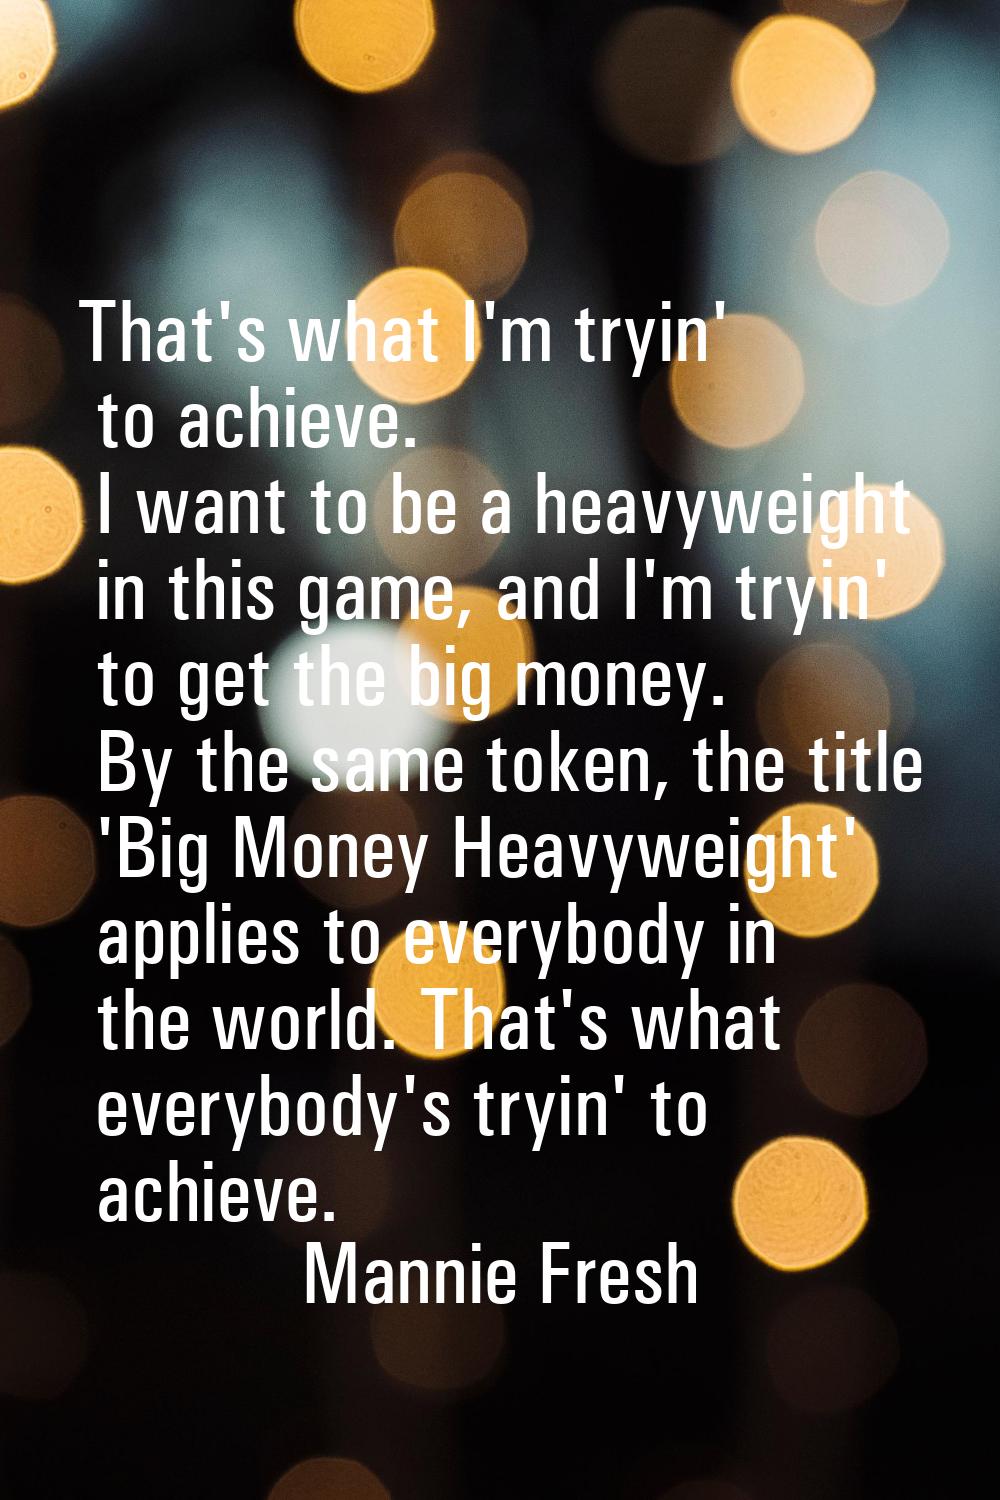 That's what I'm tryin' to achieve. I want to be a heavyweight in this game, and I'm tryin' to get t